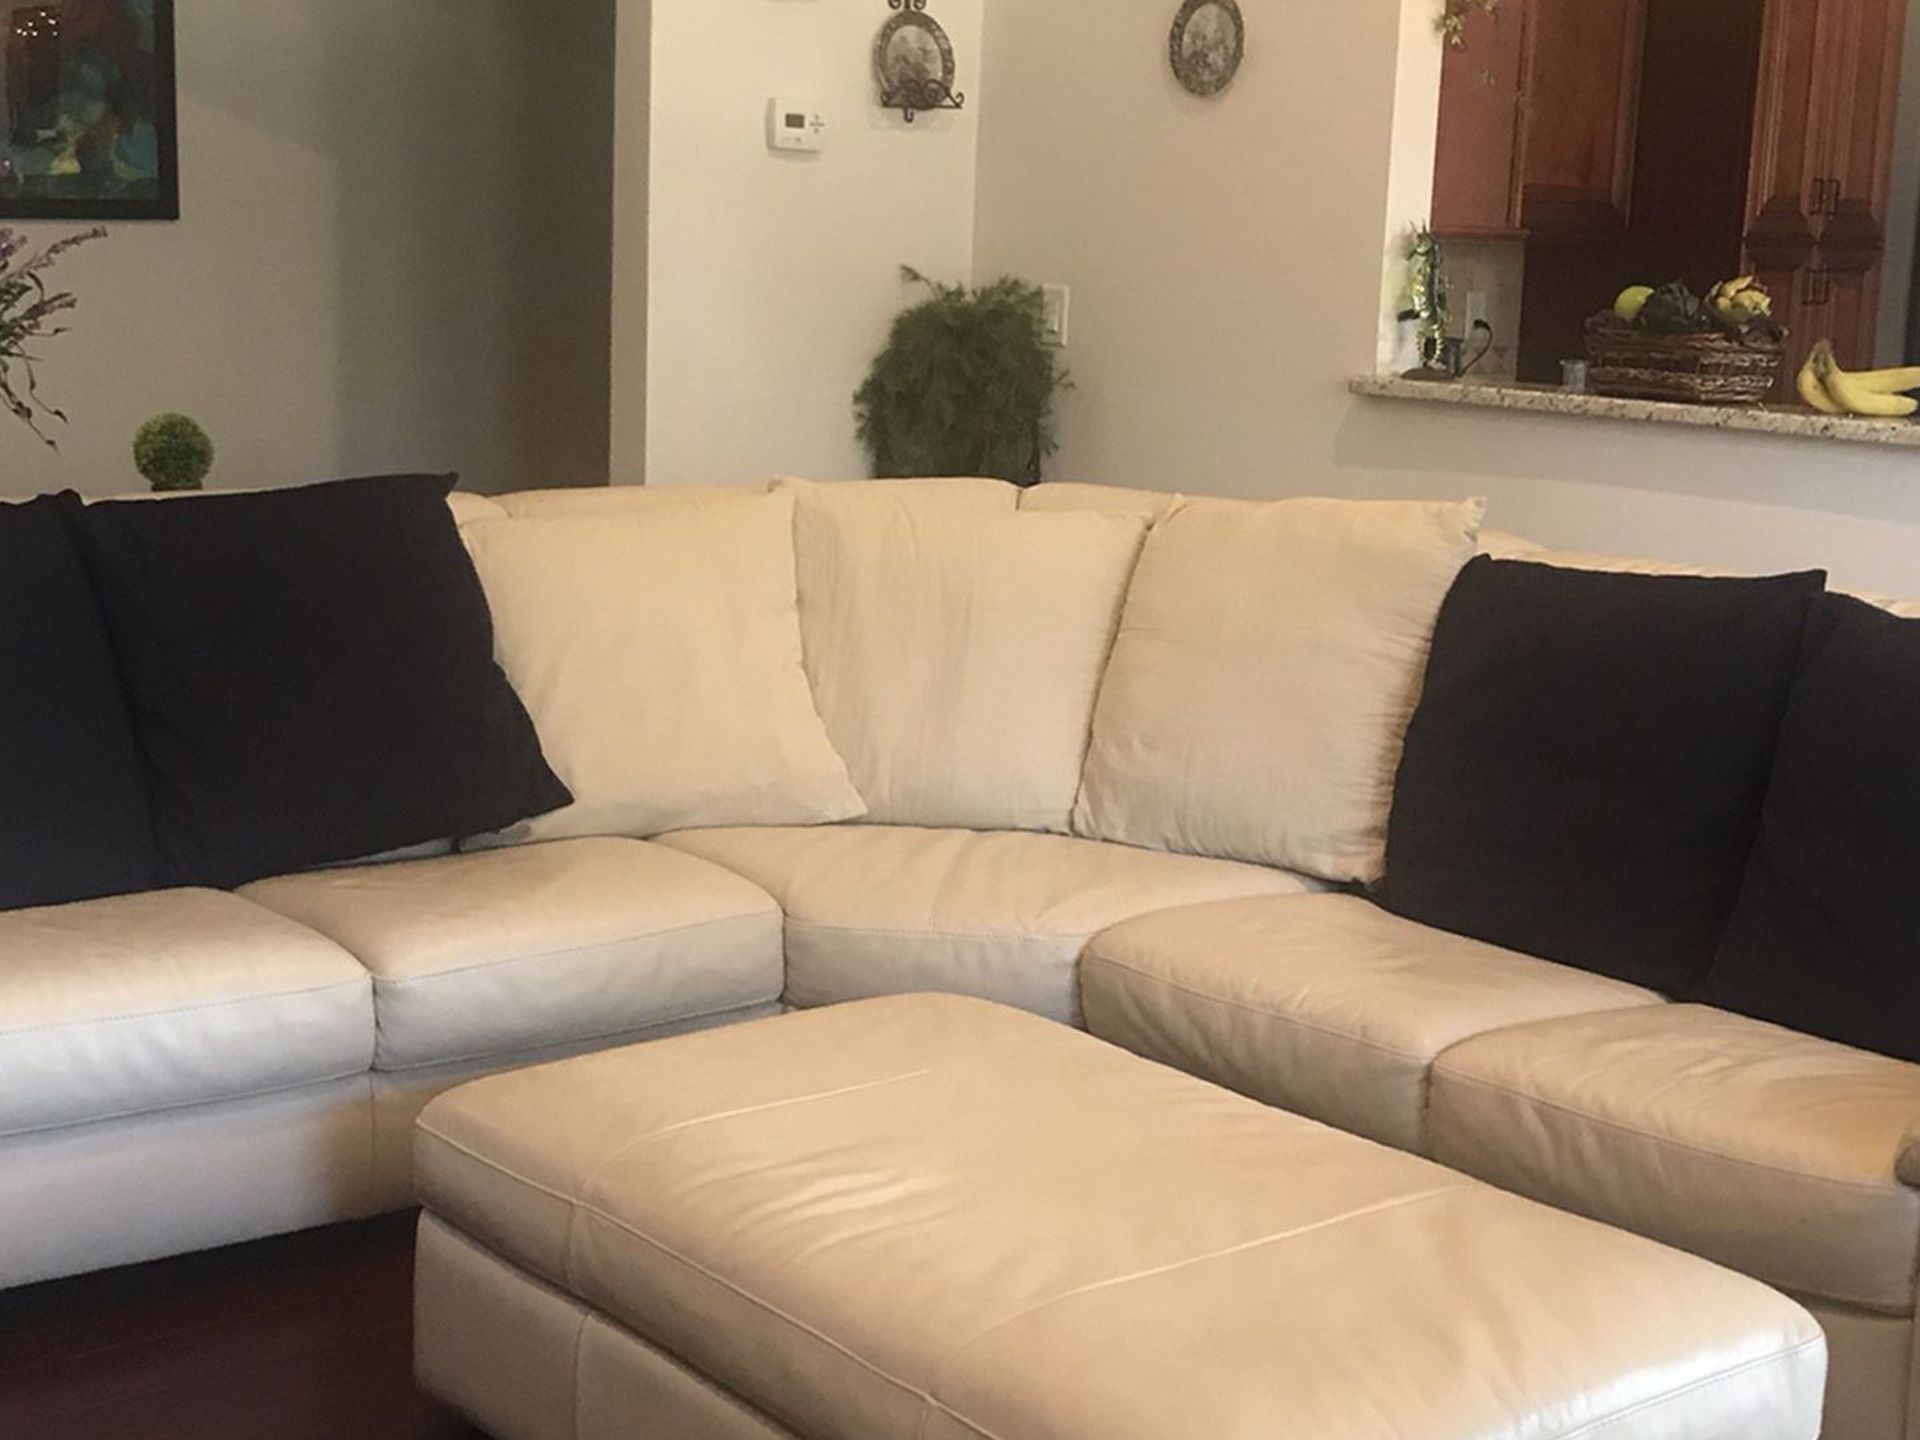 Italsofa sectional with 7 Large pillows, bought at Macy’s, In excellent condition, leather large Ottoman with storage space included